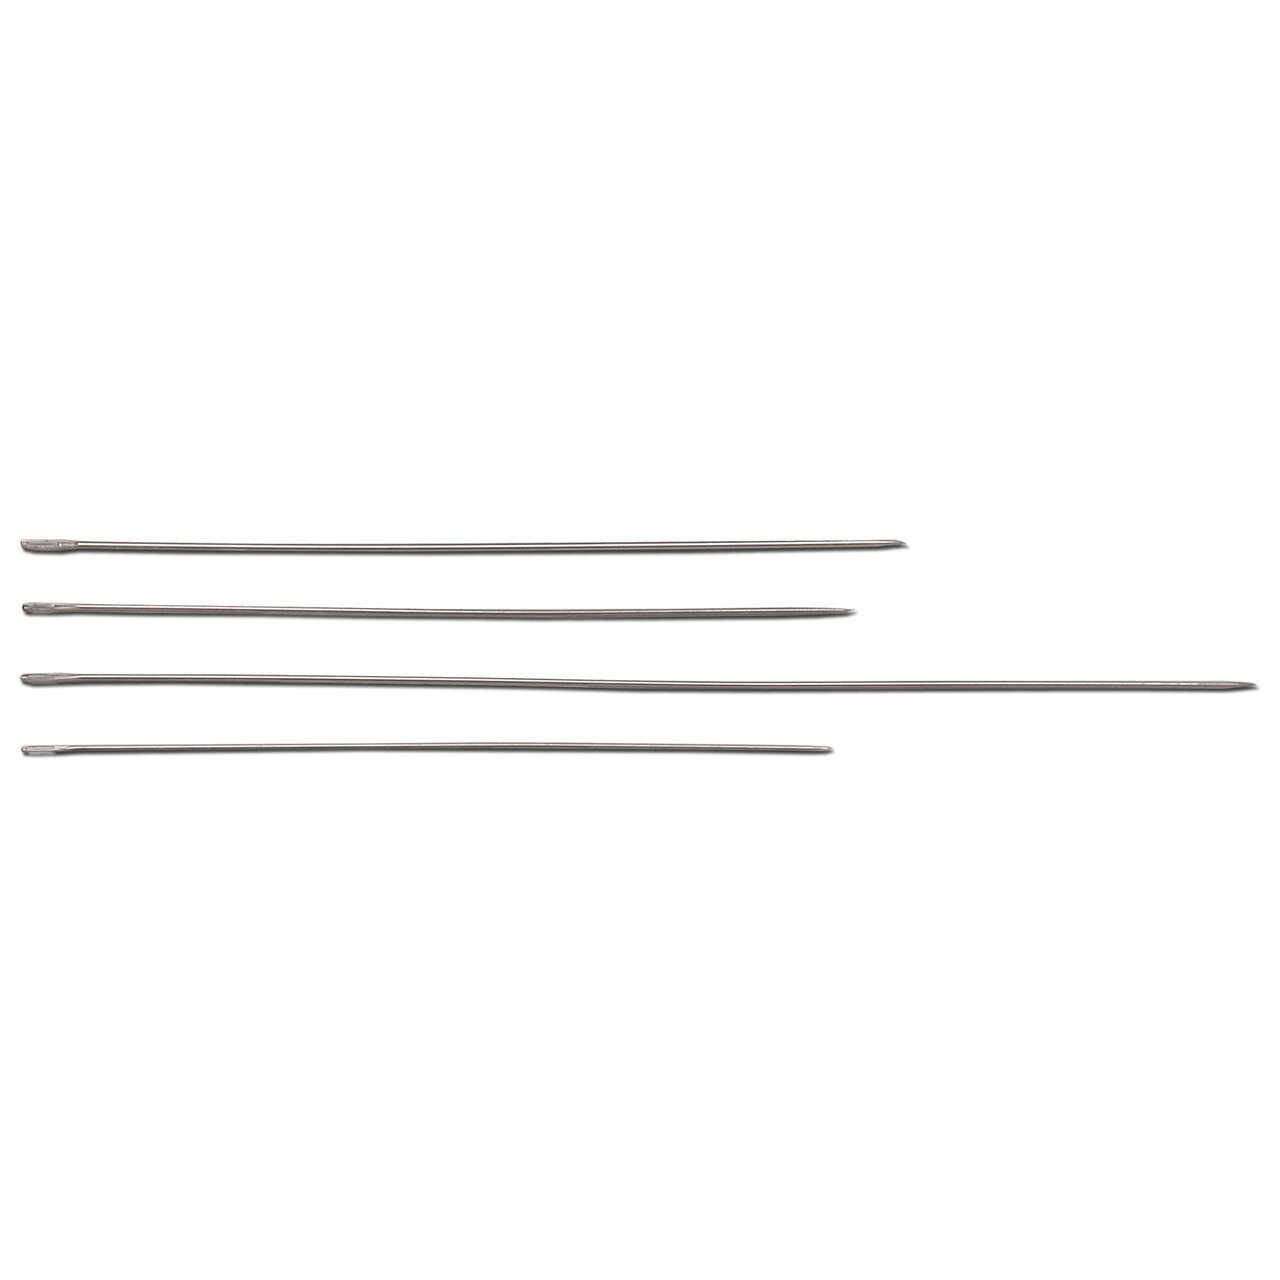 English Number 10 Pack Of 4 Beading Needles JT4804